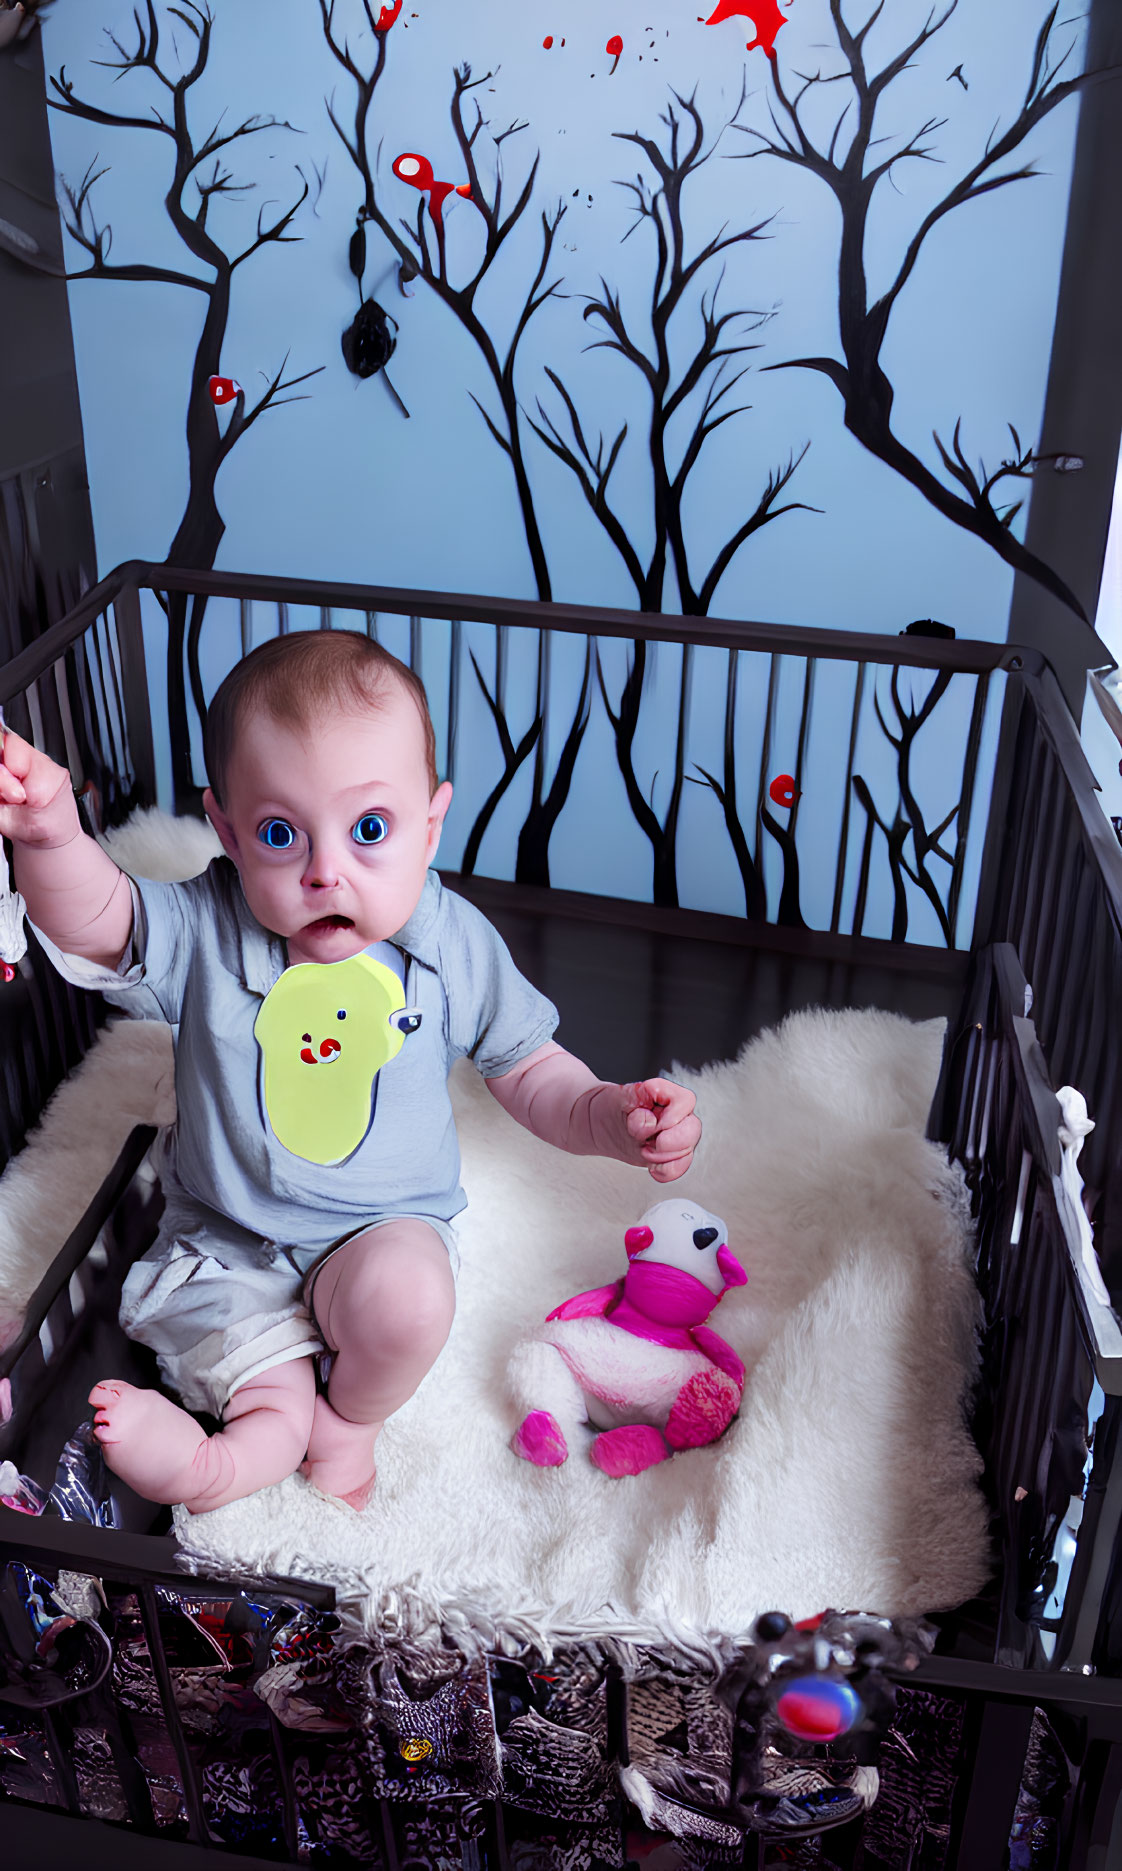 Wide-eyed baby in bib with pink toy in crib against whimsical tree mural